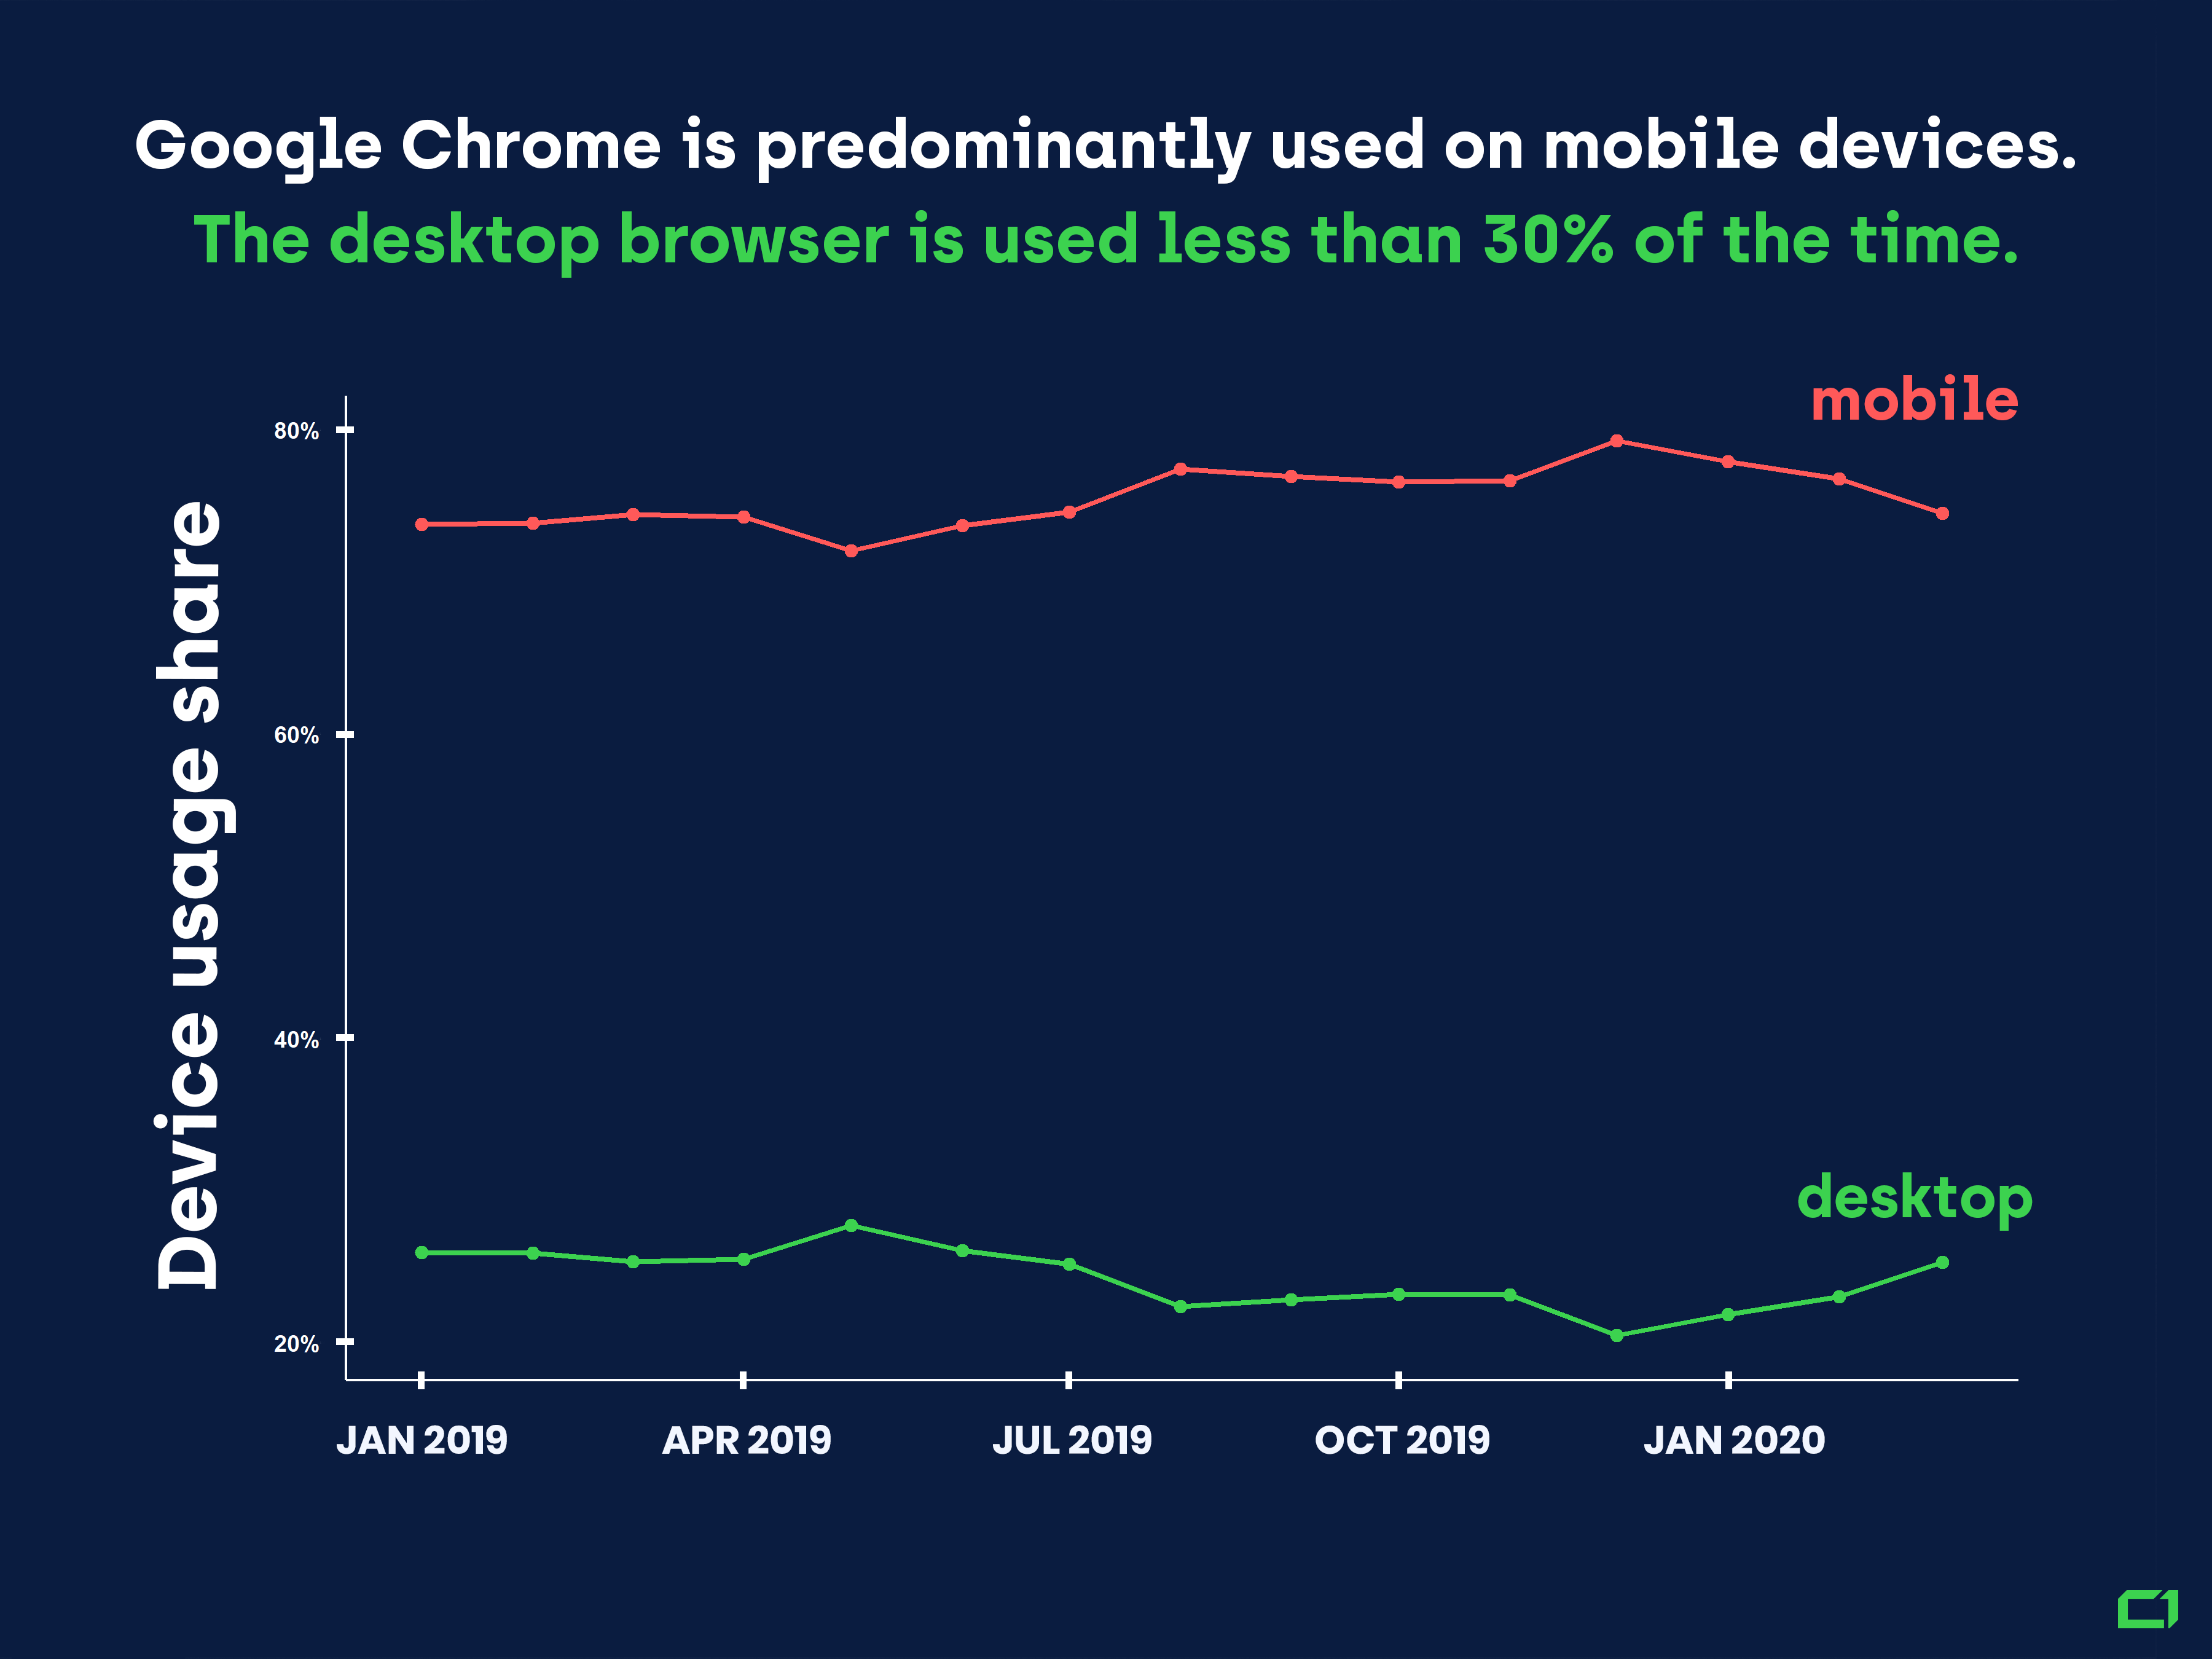 Google Chrome is predominantly used on mobile devices